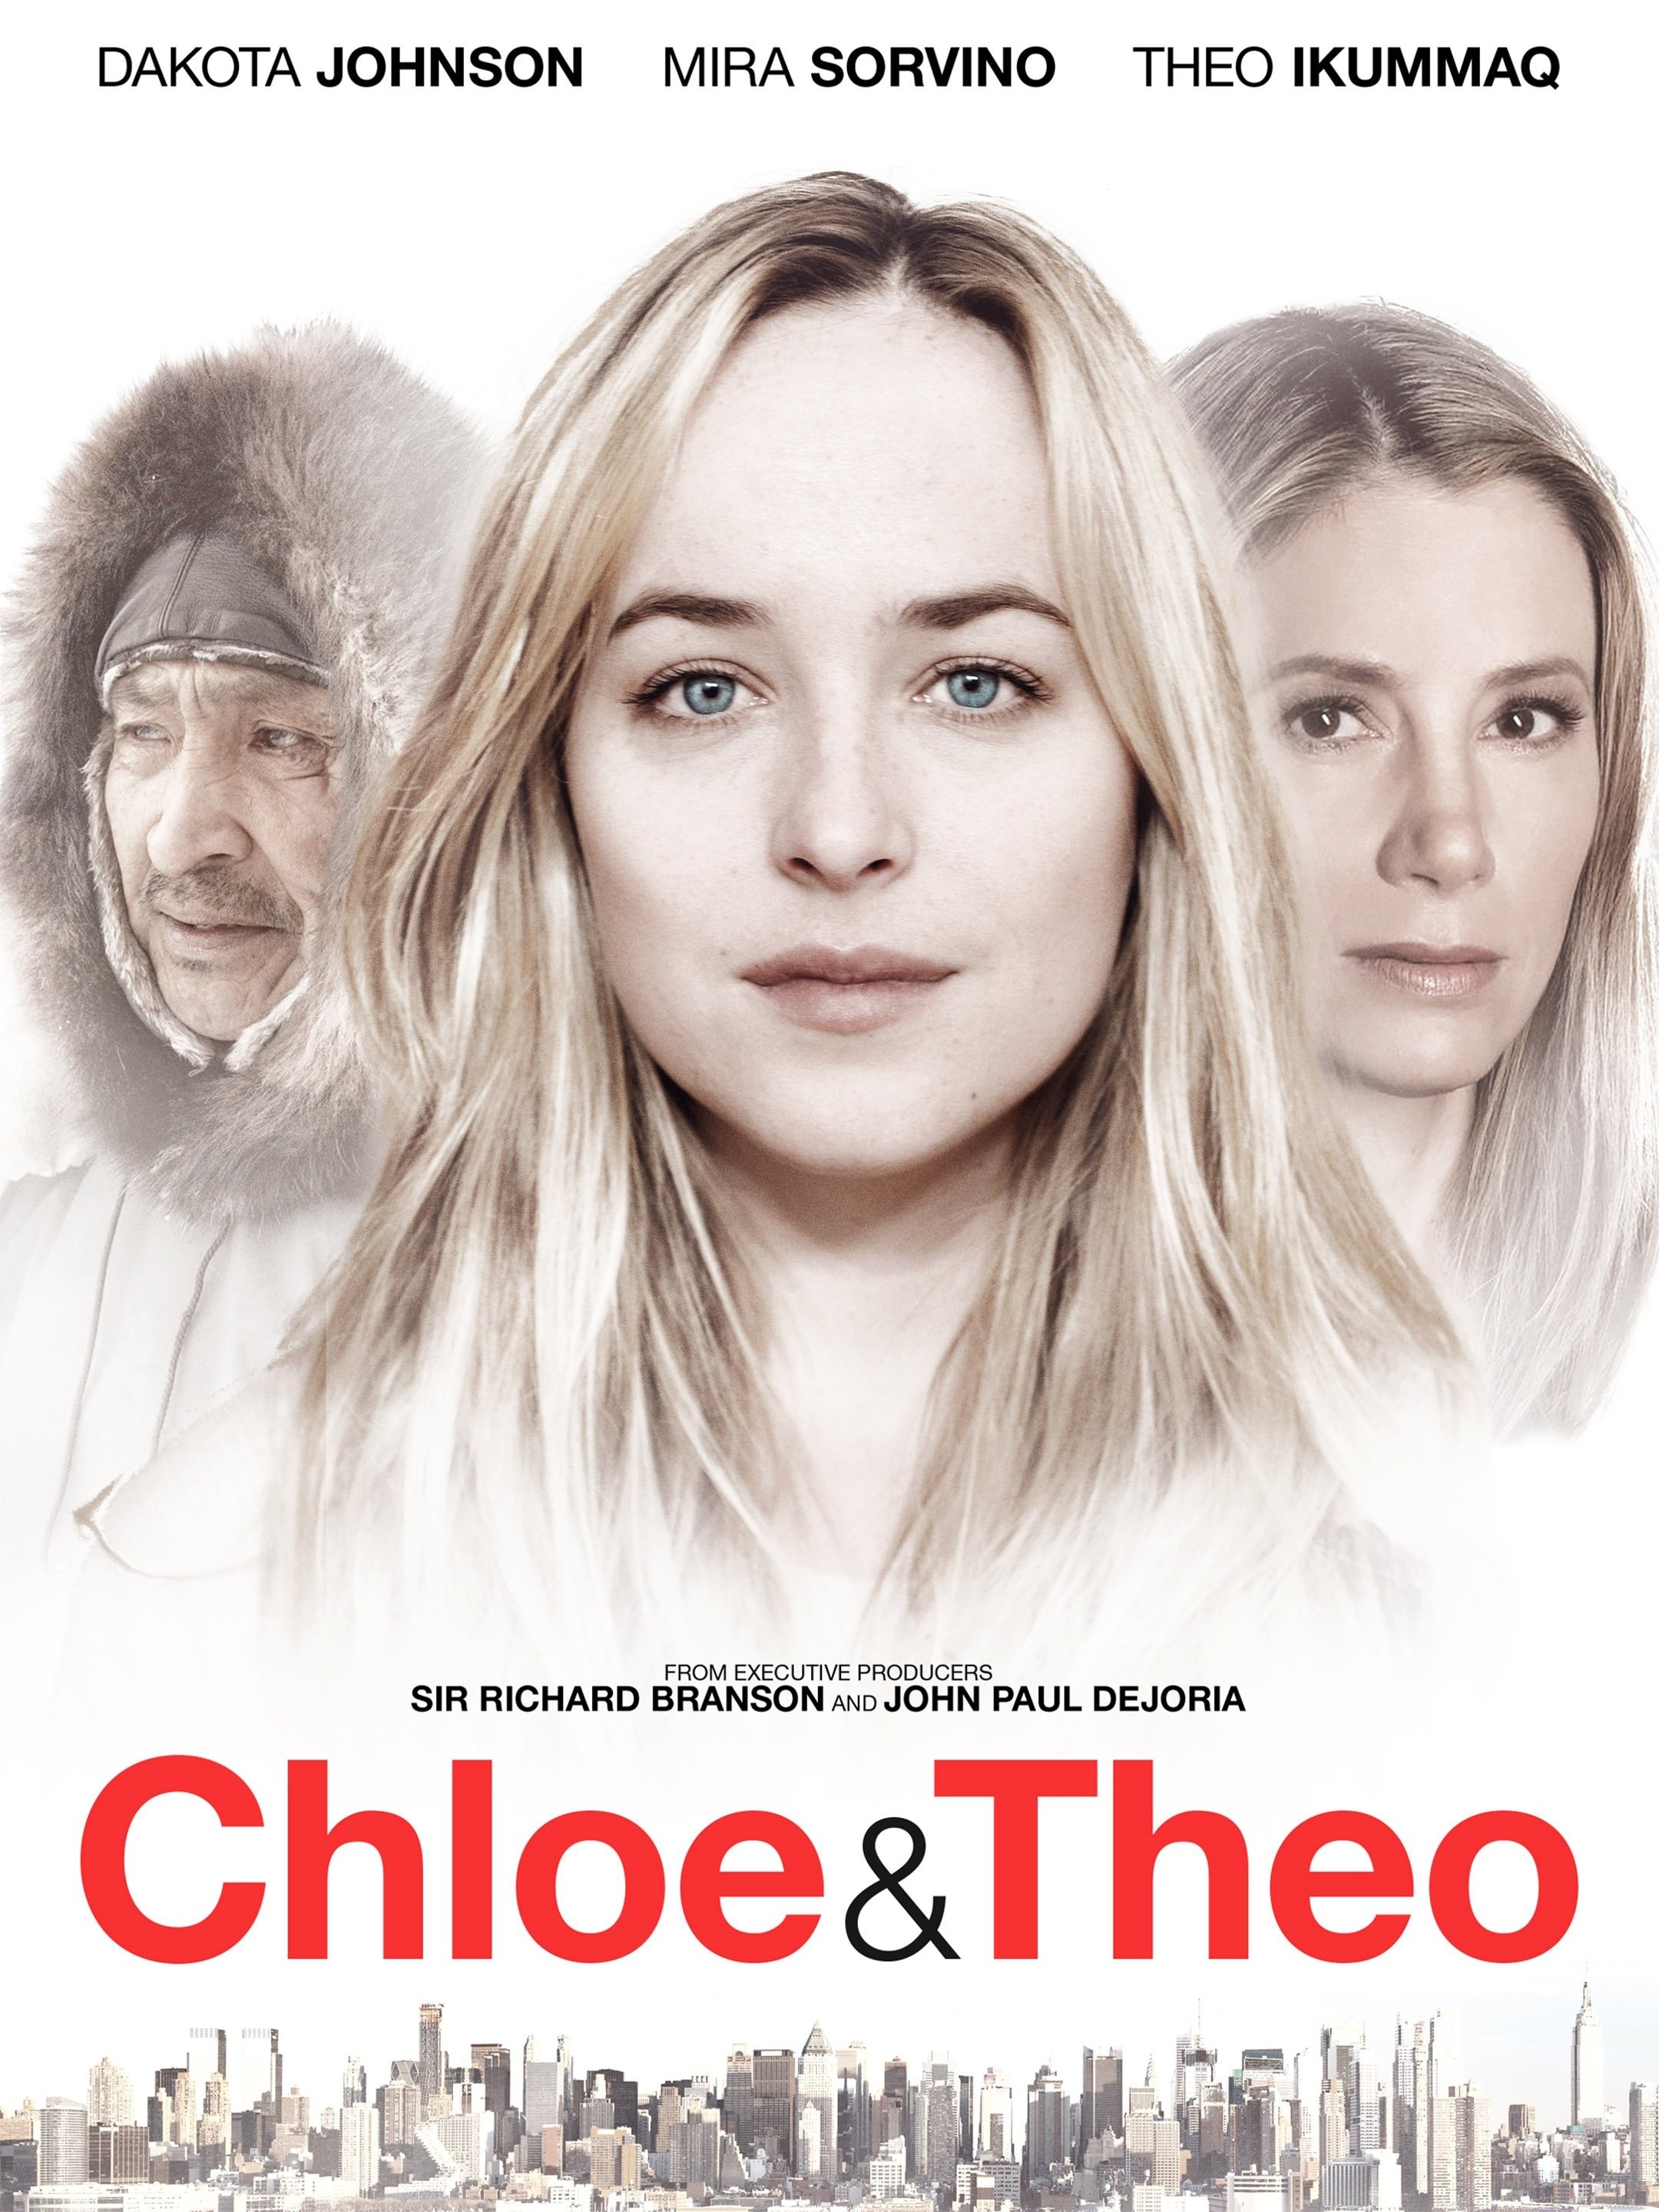 Uhdid anynone notice they cast their Chloe for the film, I